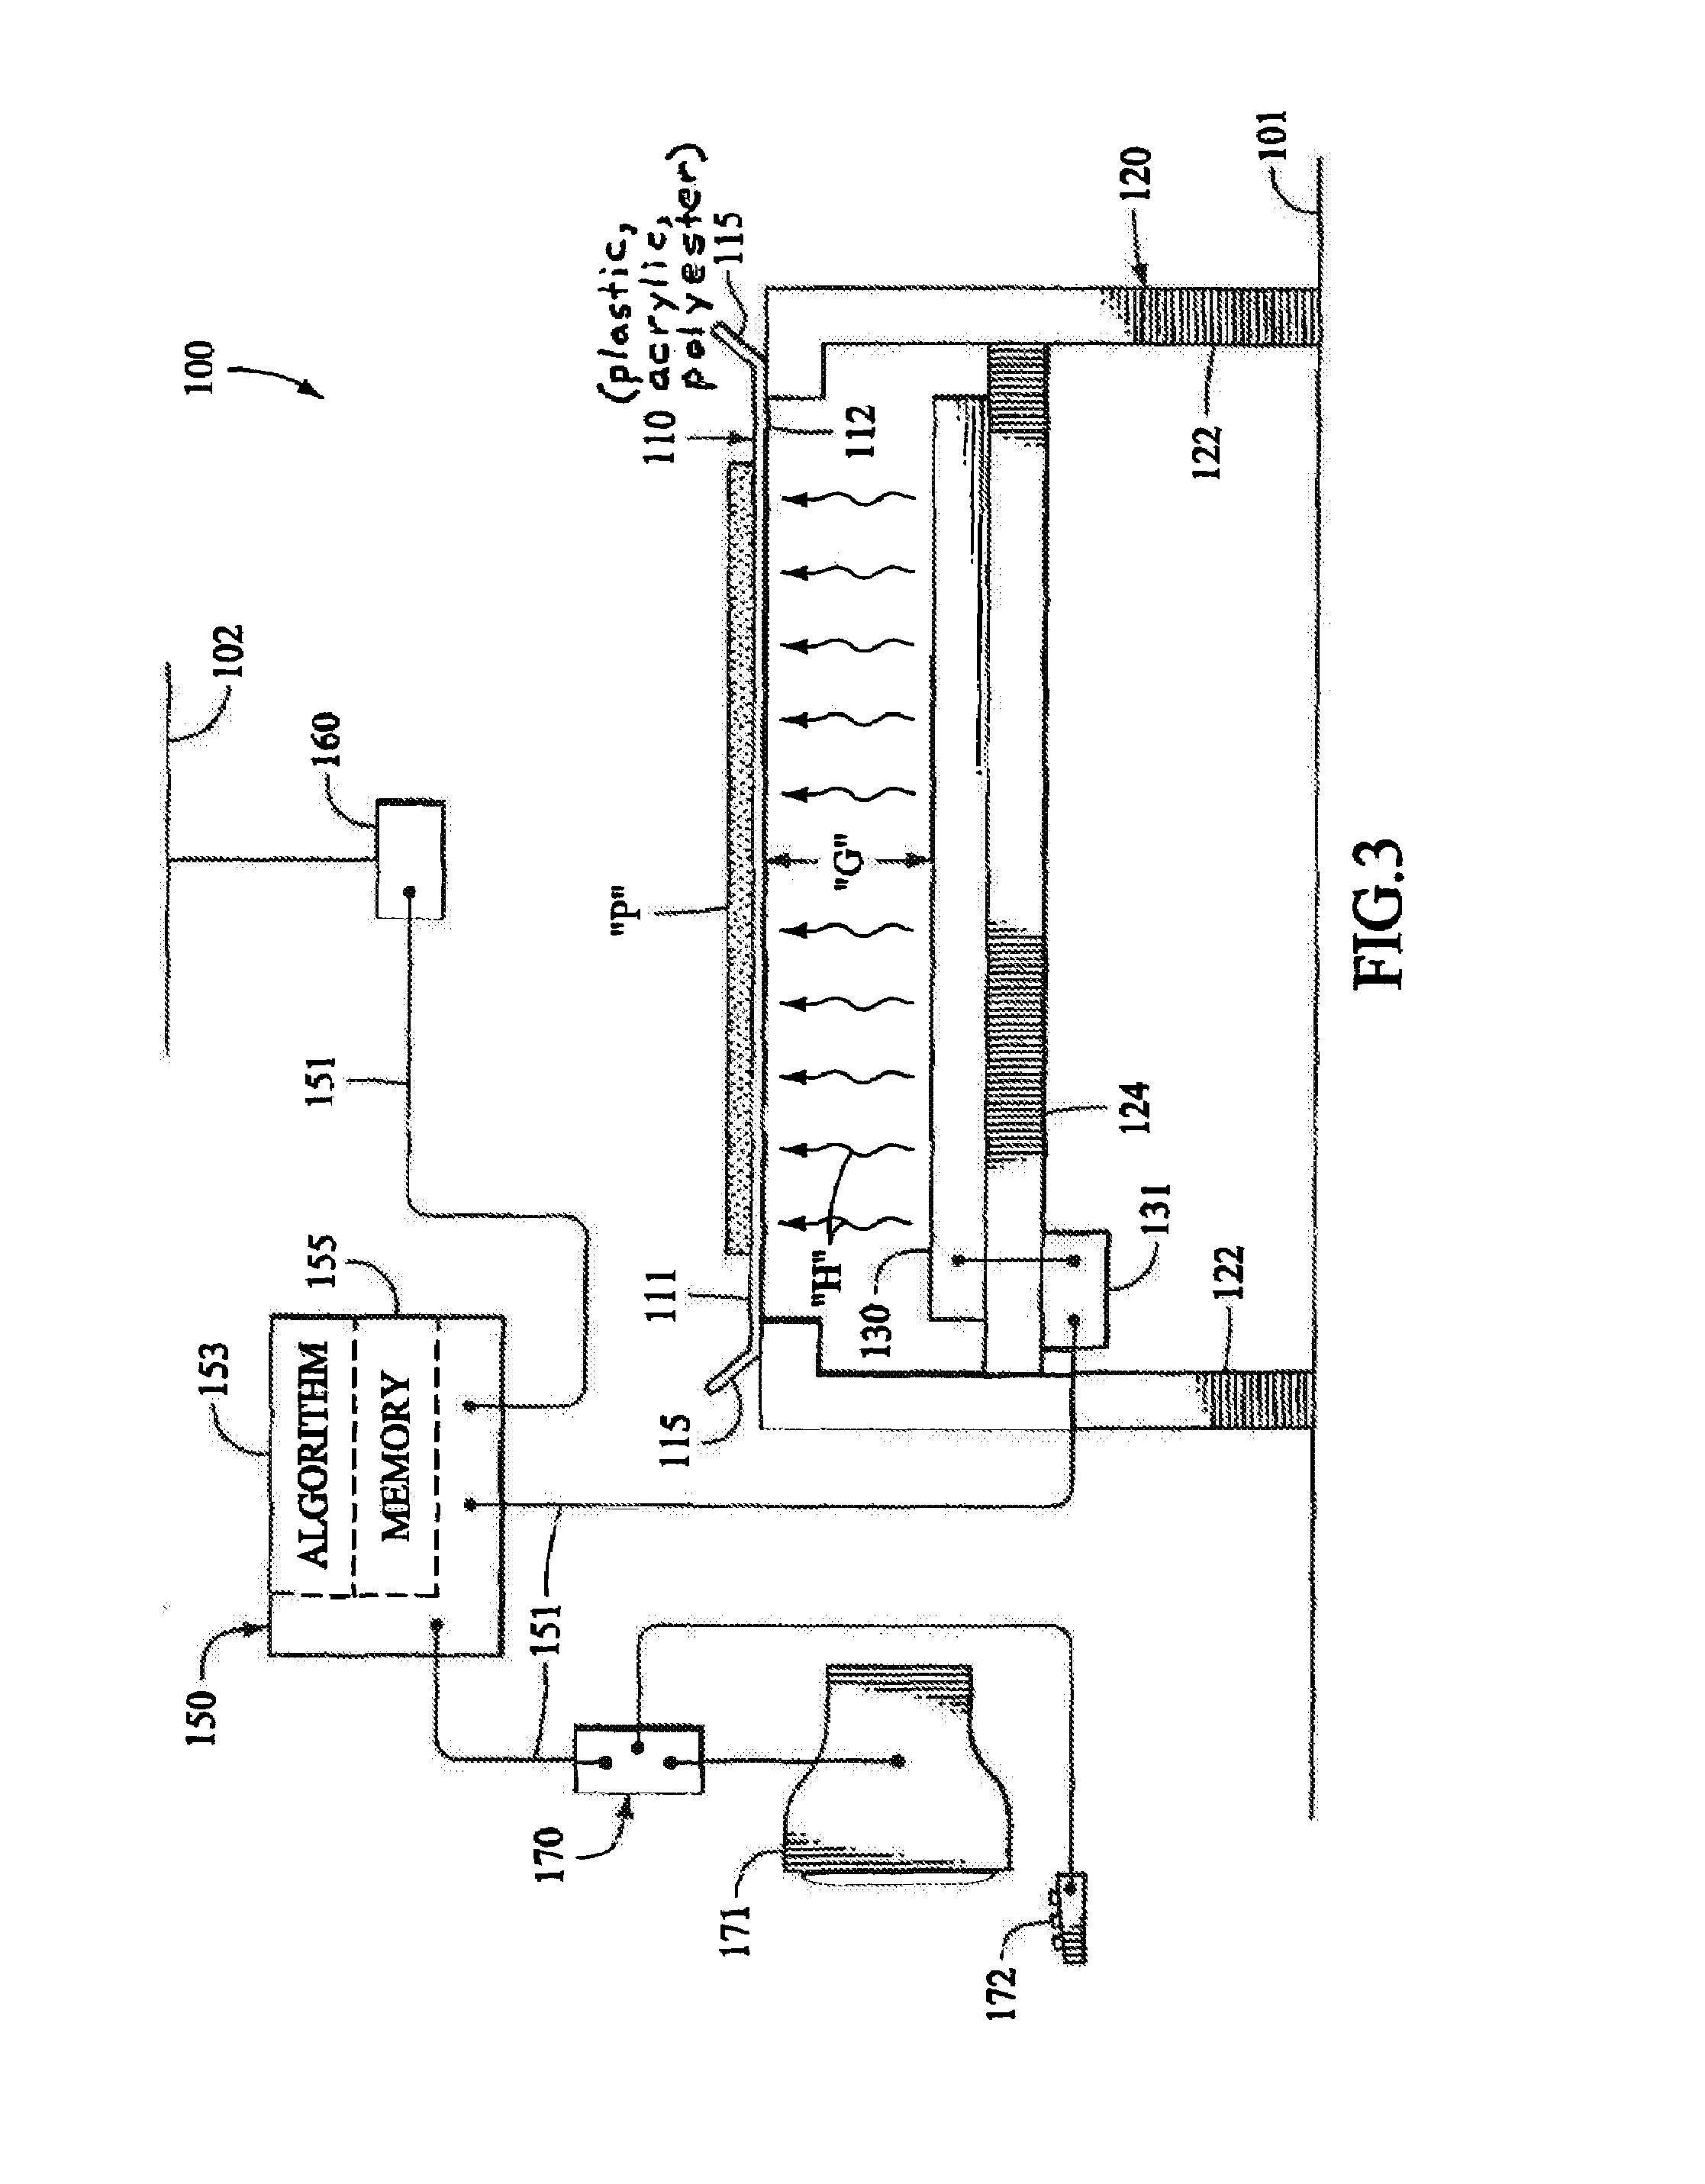 Drying apparatus and methods